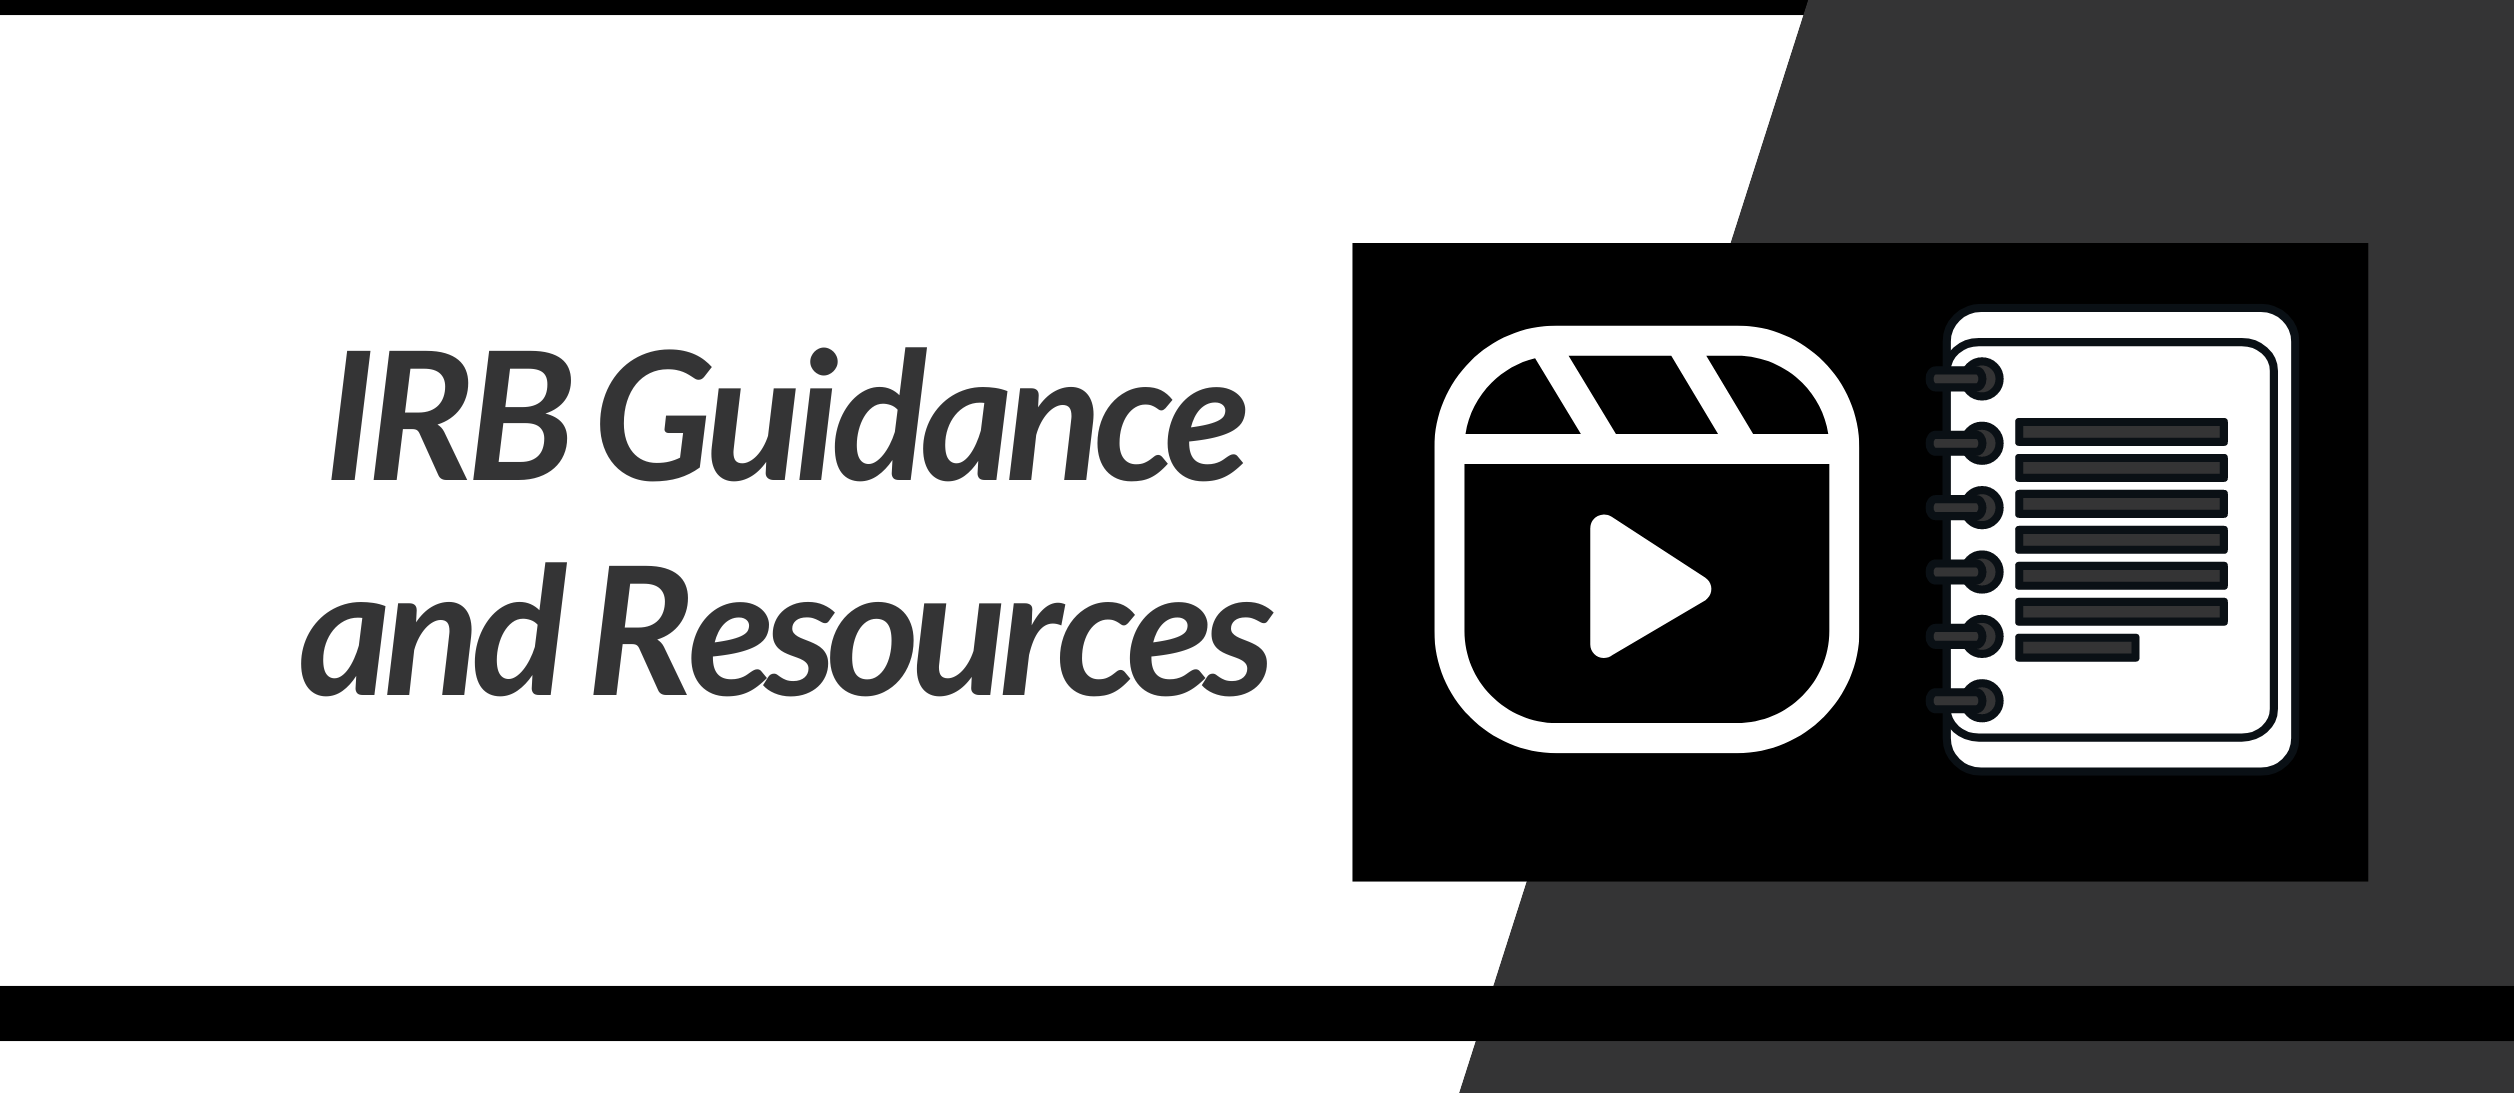 Text on image reads "IRB Guidance and Resources" and shows icons of video player and word processing document. Click the image to go to the Guidance webpage.